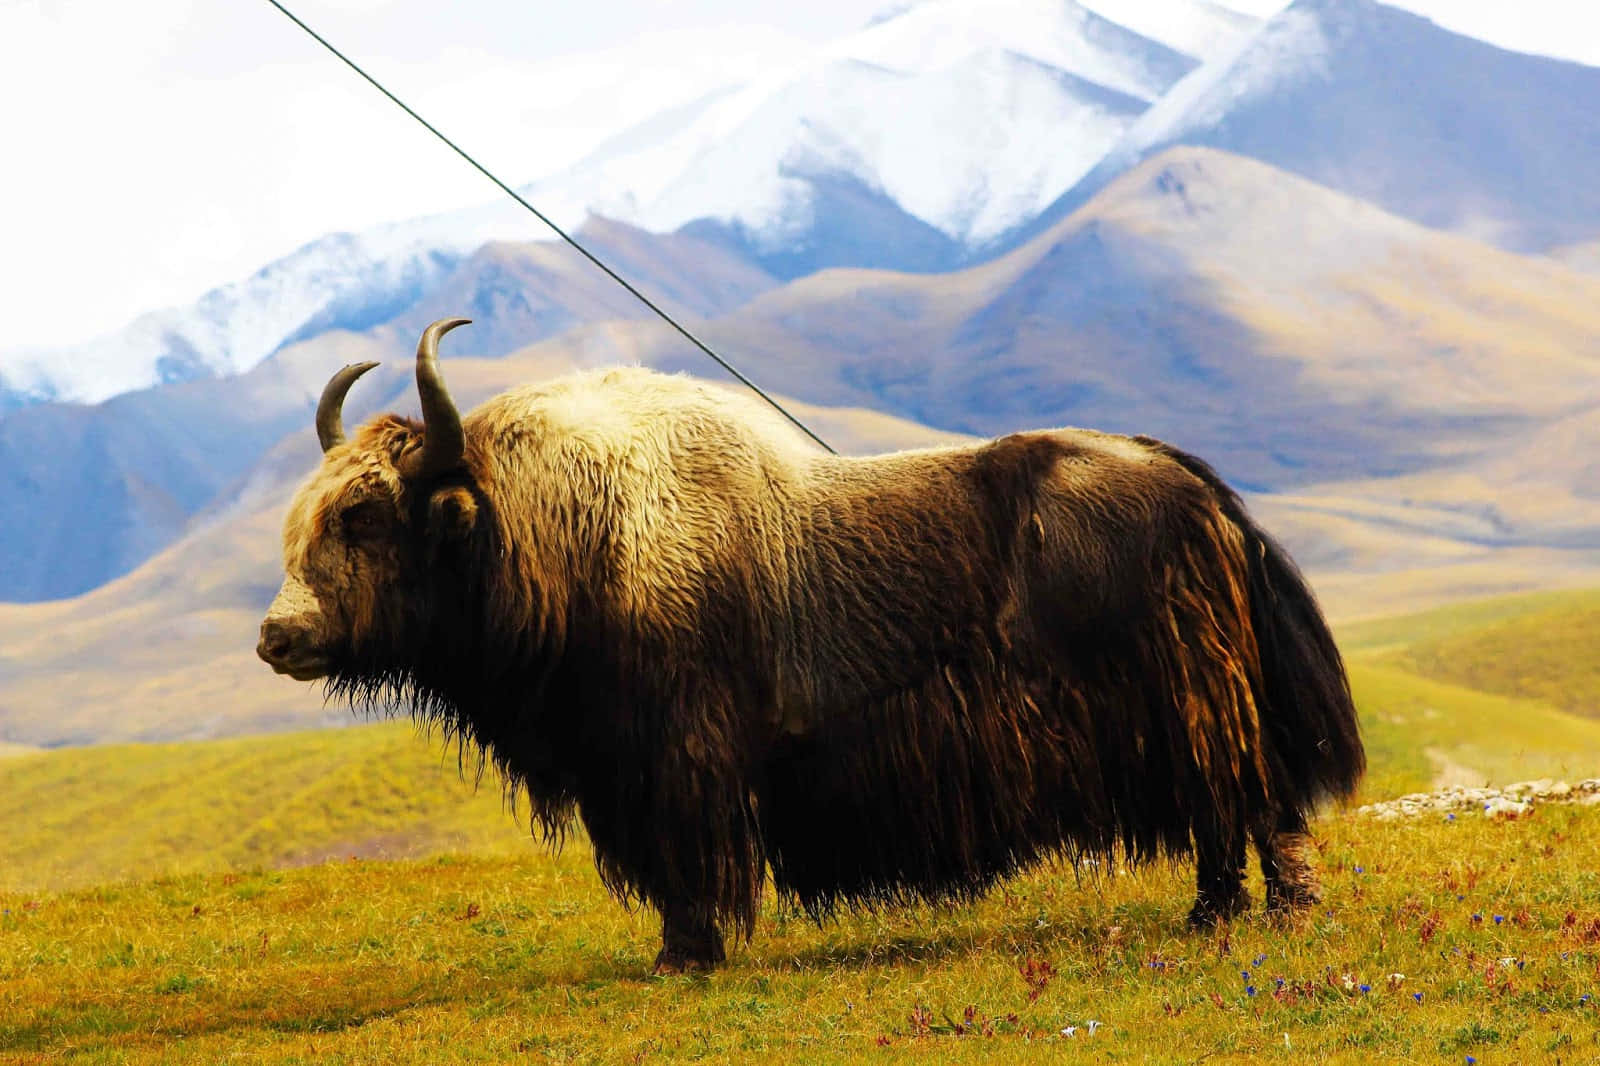 Two Himalayan Yaks in their Native Environment